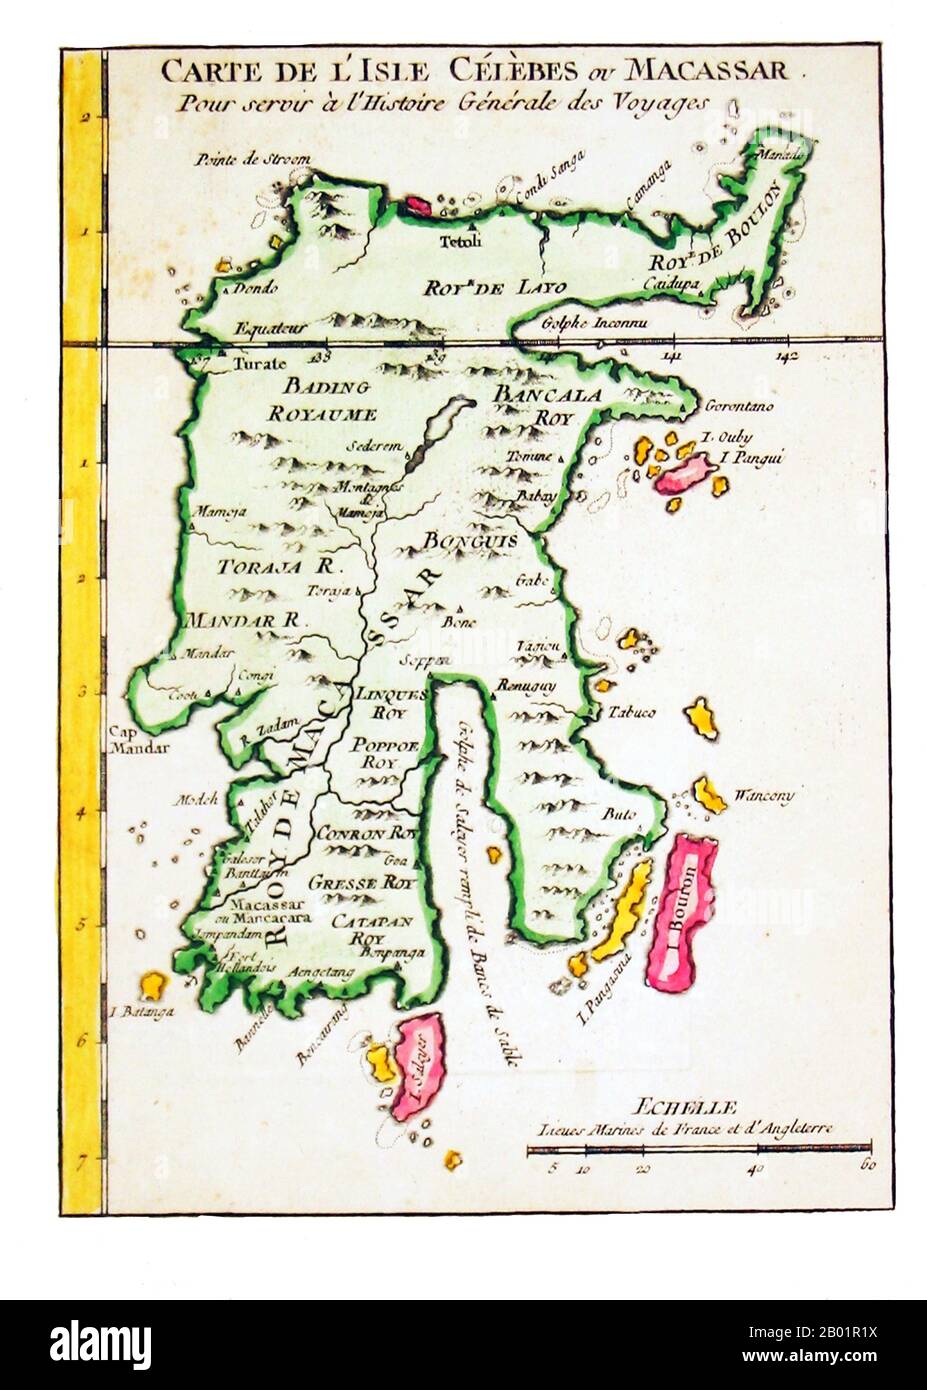 Indonesia/Netherlands: Early map of Sulawesi (the Celebes). Engraving on paper by Jakob van der Schley (26 July 1715 - 12 February 1779) and Pieter de Hondt (May 1696 - 27 March 1764), c. 1757.  Sulawesi (formerly known as Celebes) is one of the four larger Sunda Islands of Indonesia and is situated between Borneo and the Maluku Islands. In Indonesia, only Sumatra, Borneo, and Papua are larger in territory, and only Java and Sumatra have larger Indonesian populations. Stock Photo